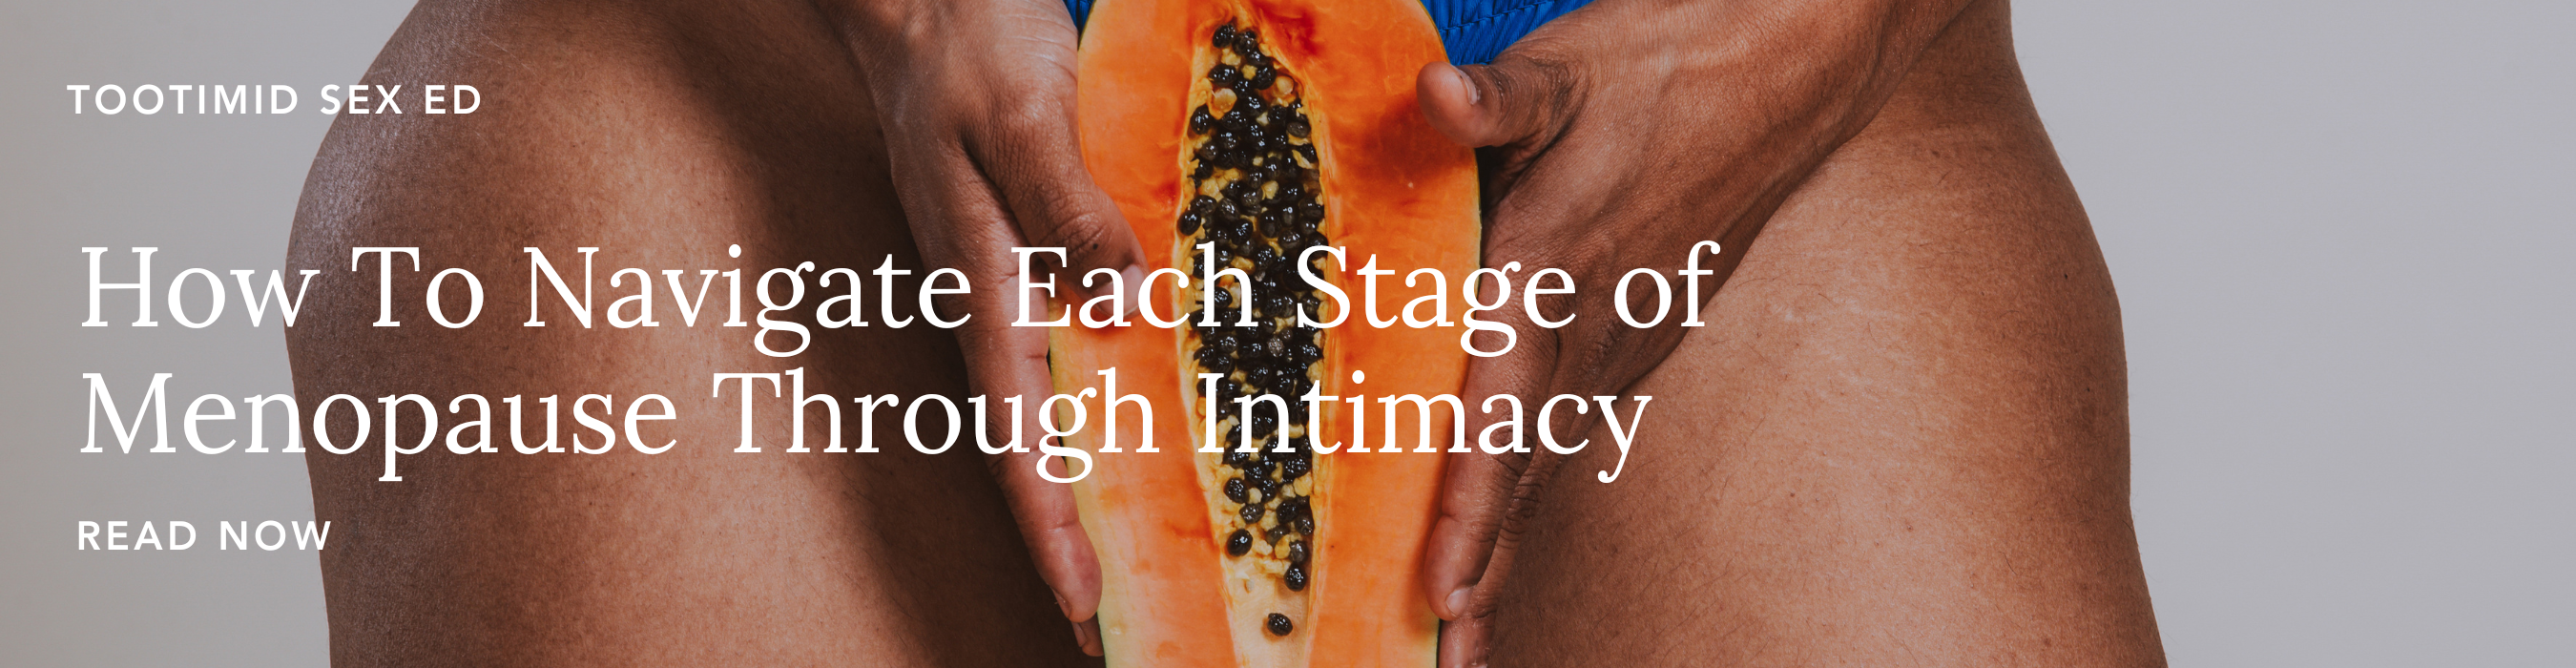 TooTimid Sex Ed: How To Navigate Each Stage of Menopause Through Intimacy - Read Now!